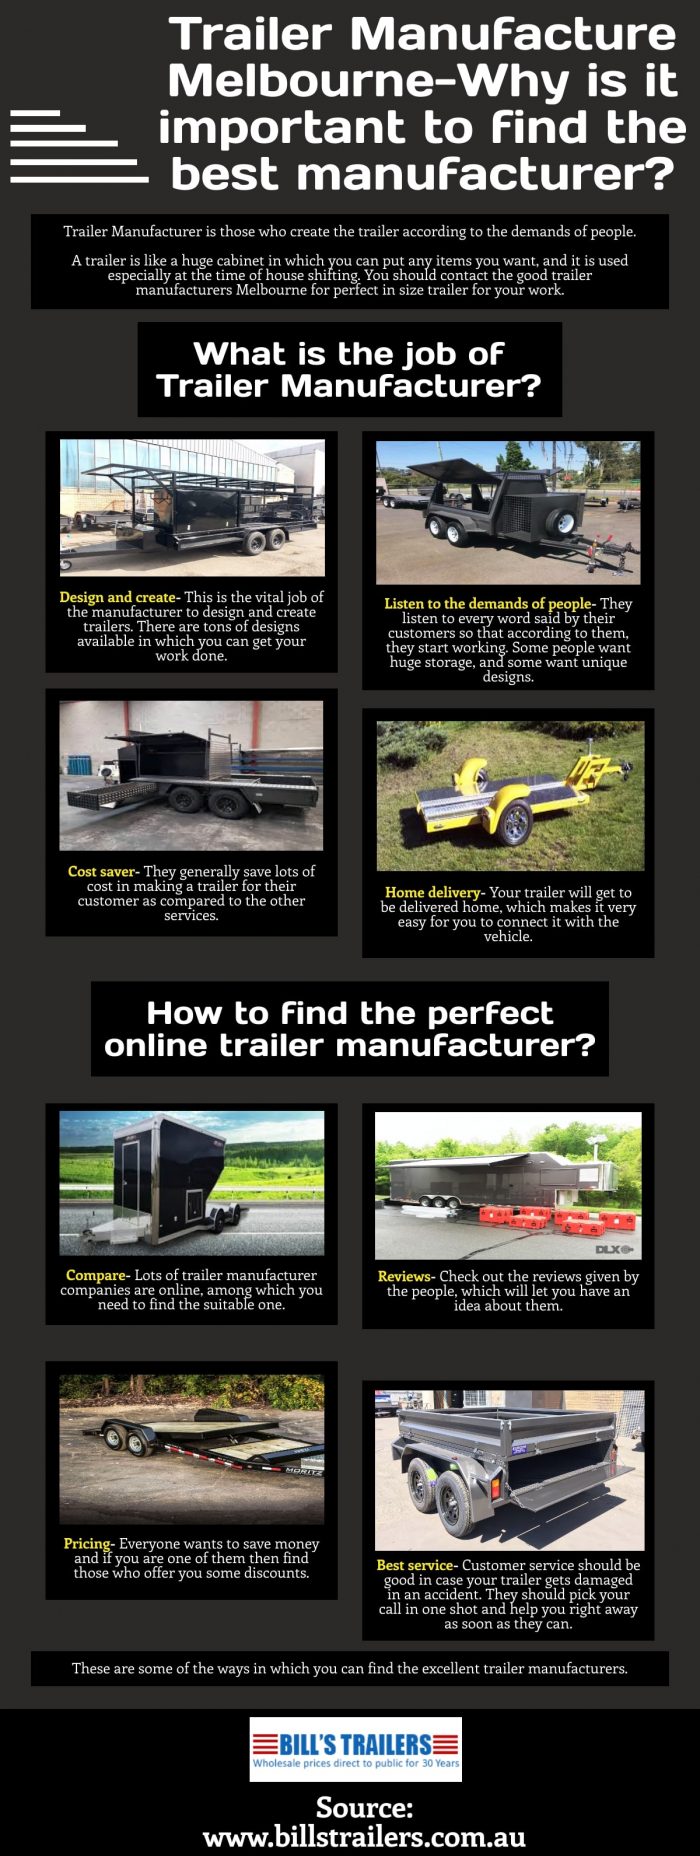 How can you contact the trailer manufacturer online?